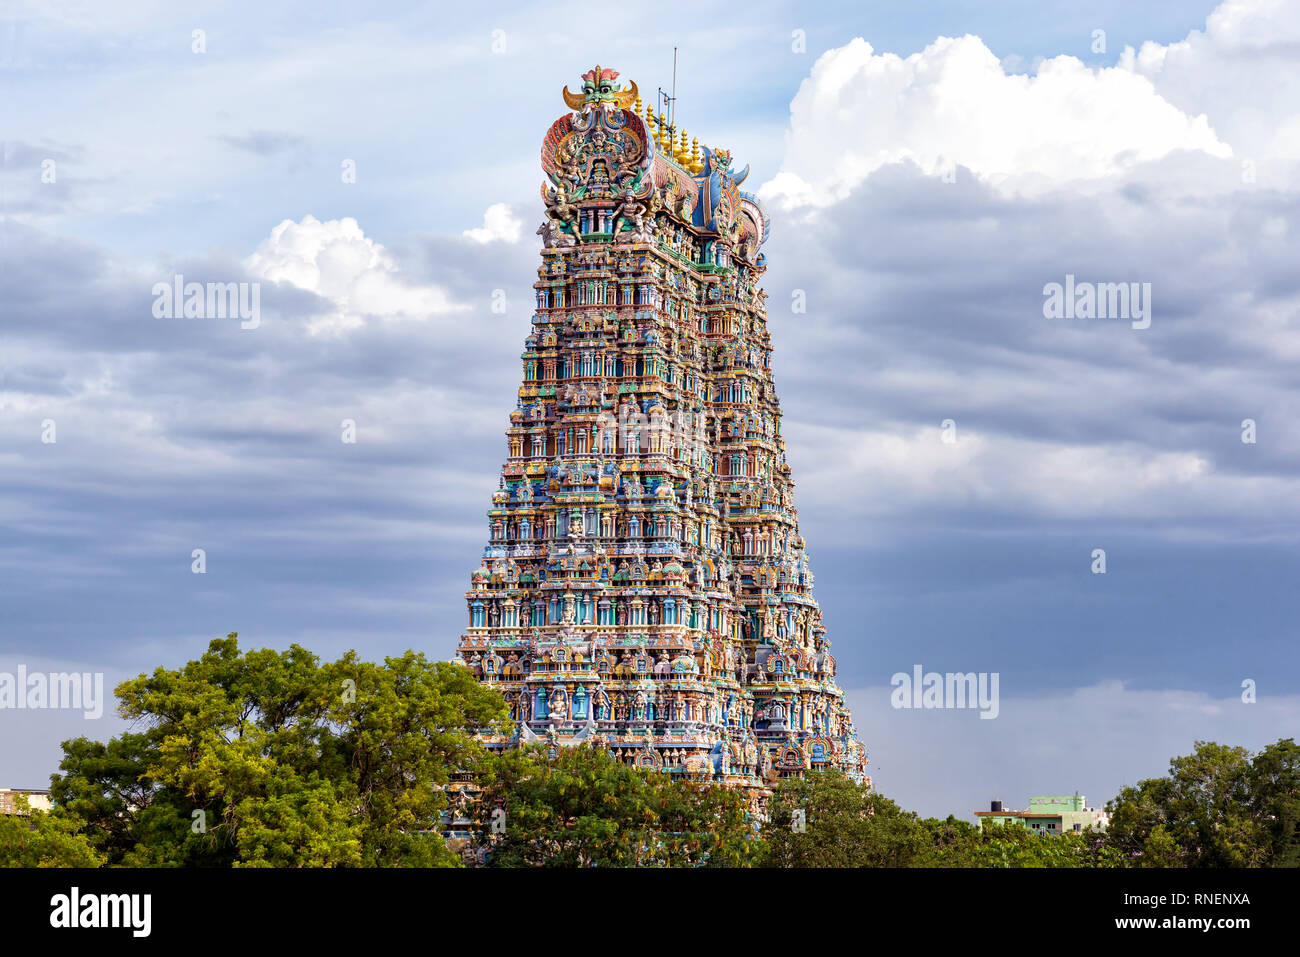 The north gopuram of the Meenakshi temple in Madurai, India. A Gopuram is a monumental gatehouse tower at the entrance of a Hindu temple. Stock Photo